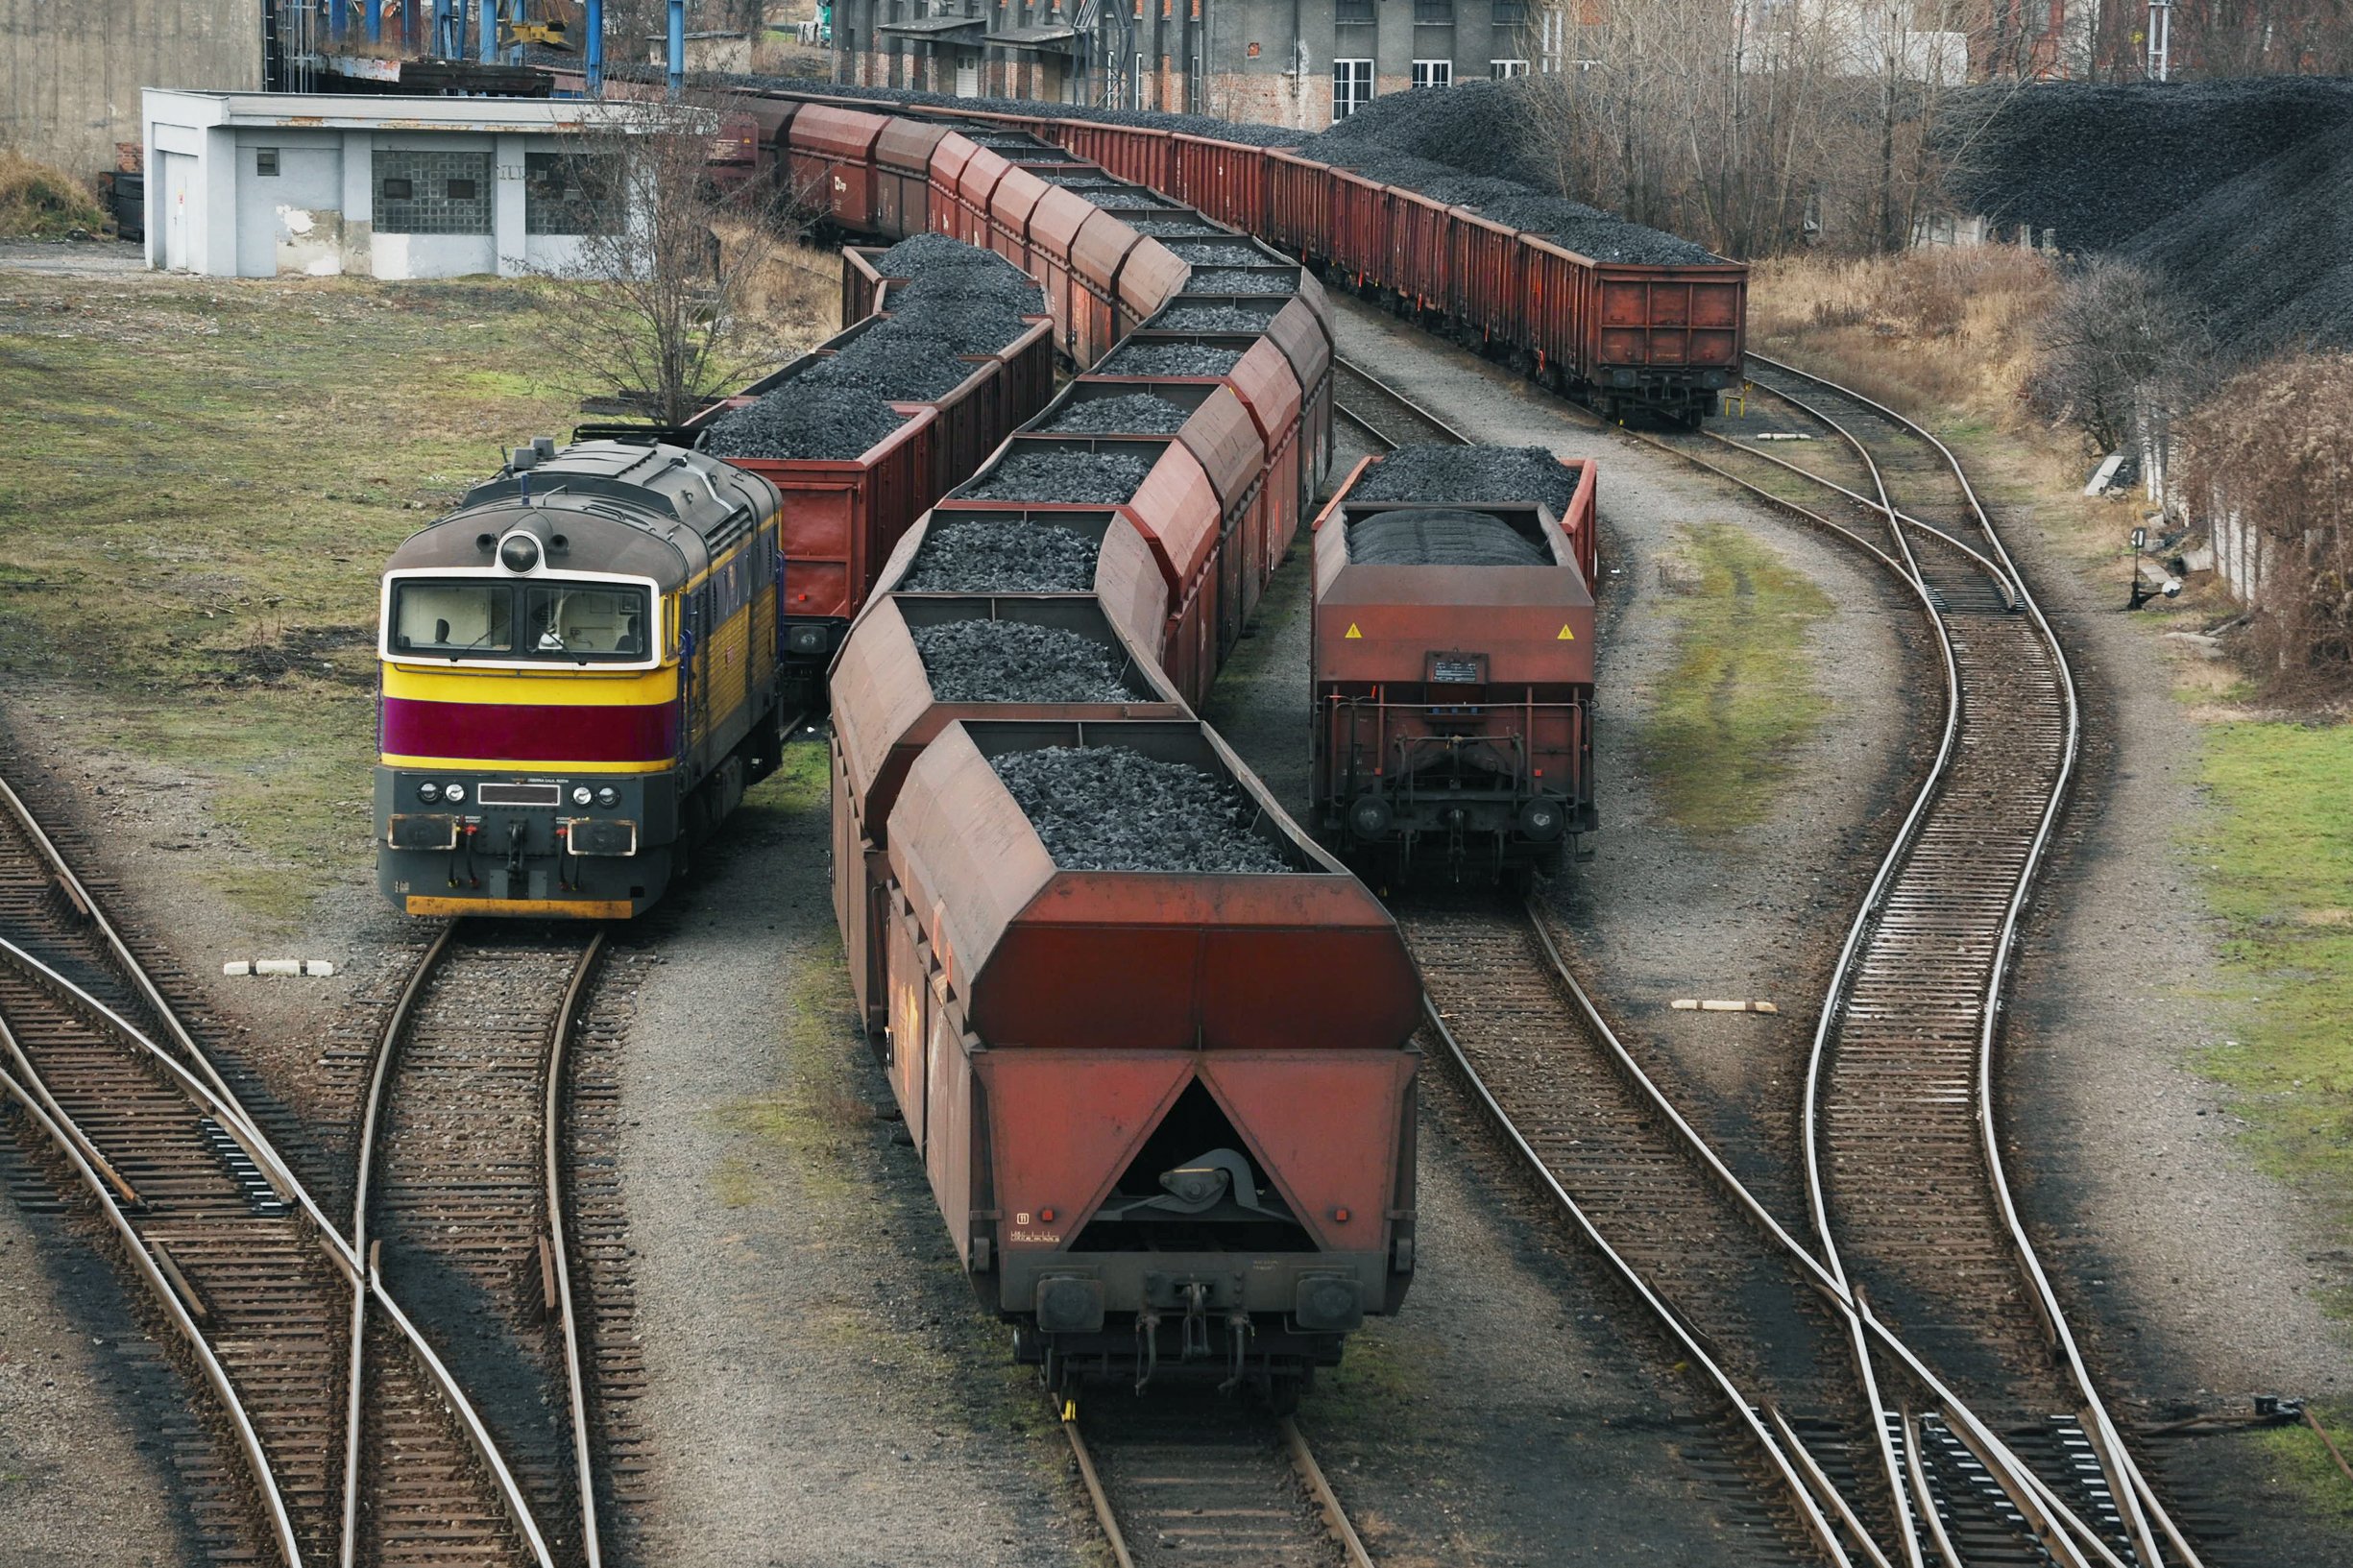 Cargo trains loaded with coal advance simultaneously on 4 separate, winding tracks destined for Coal power plants